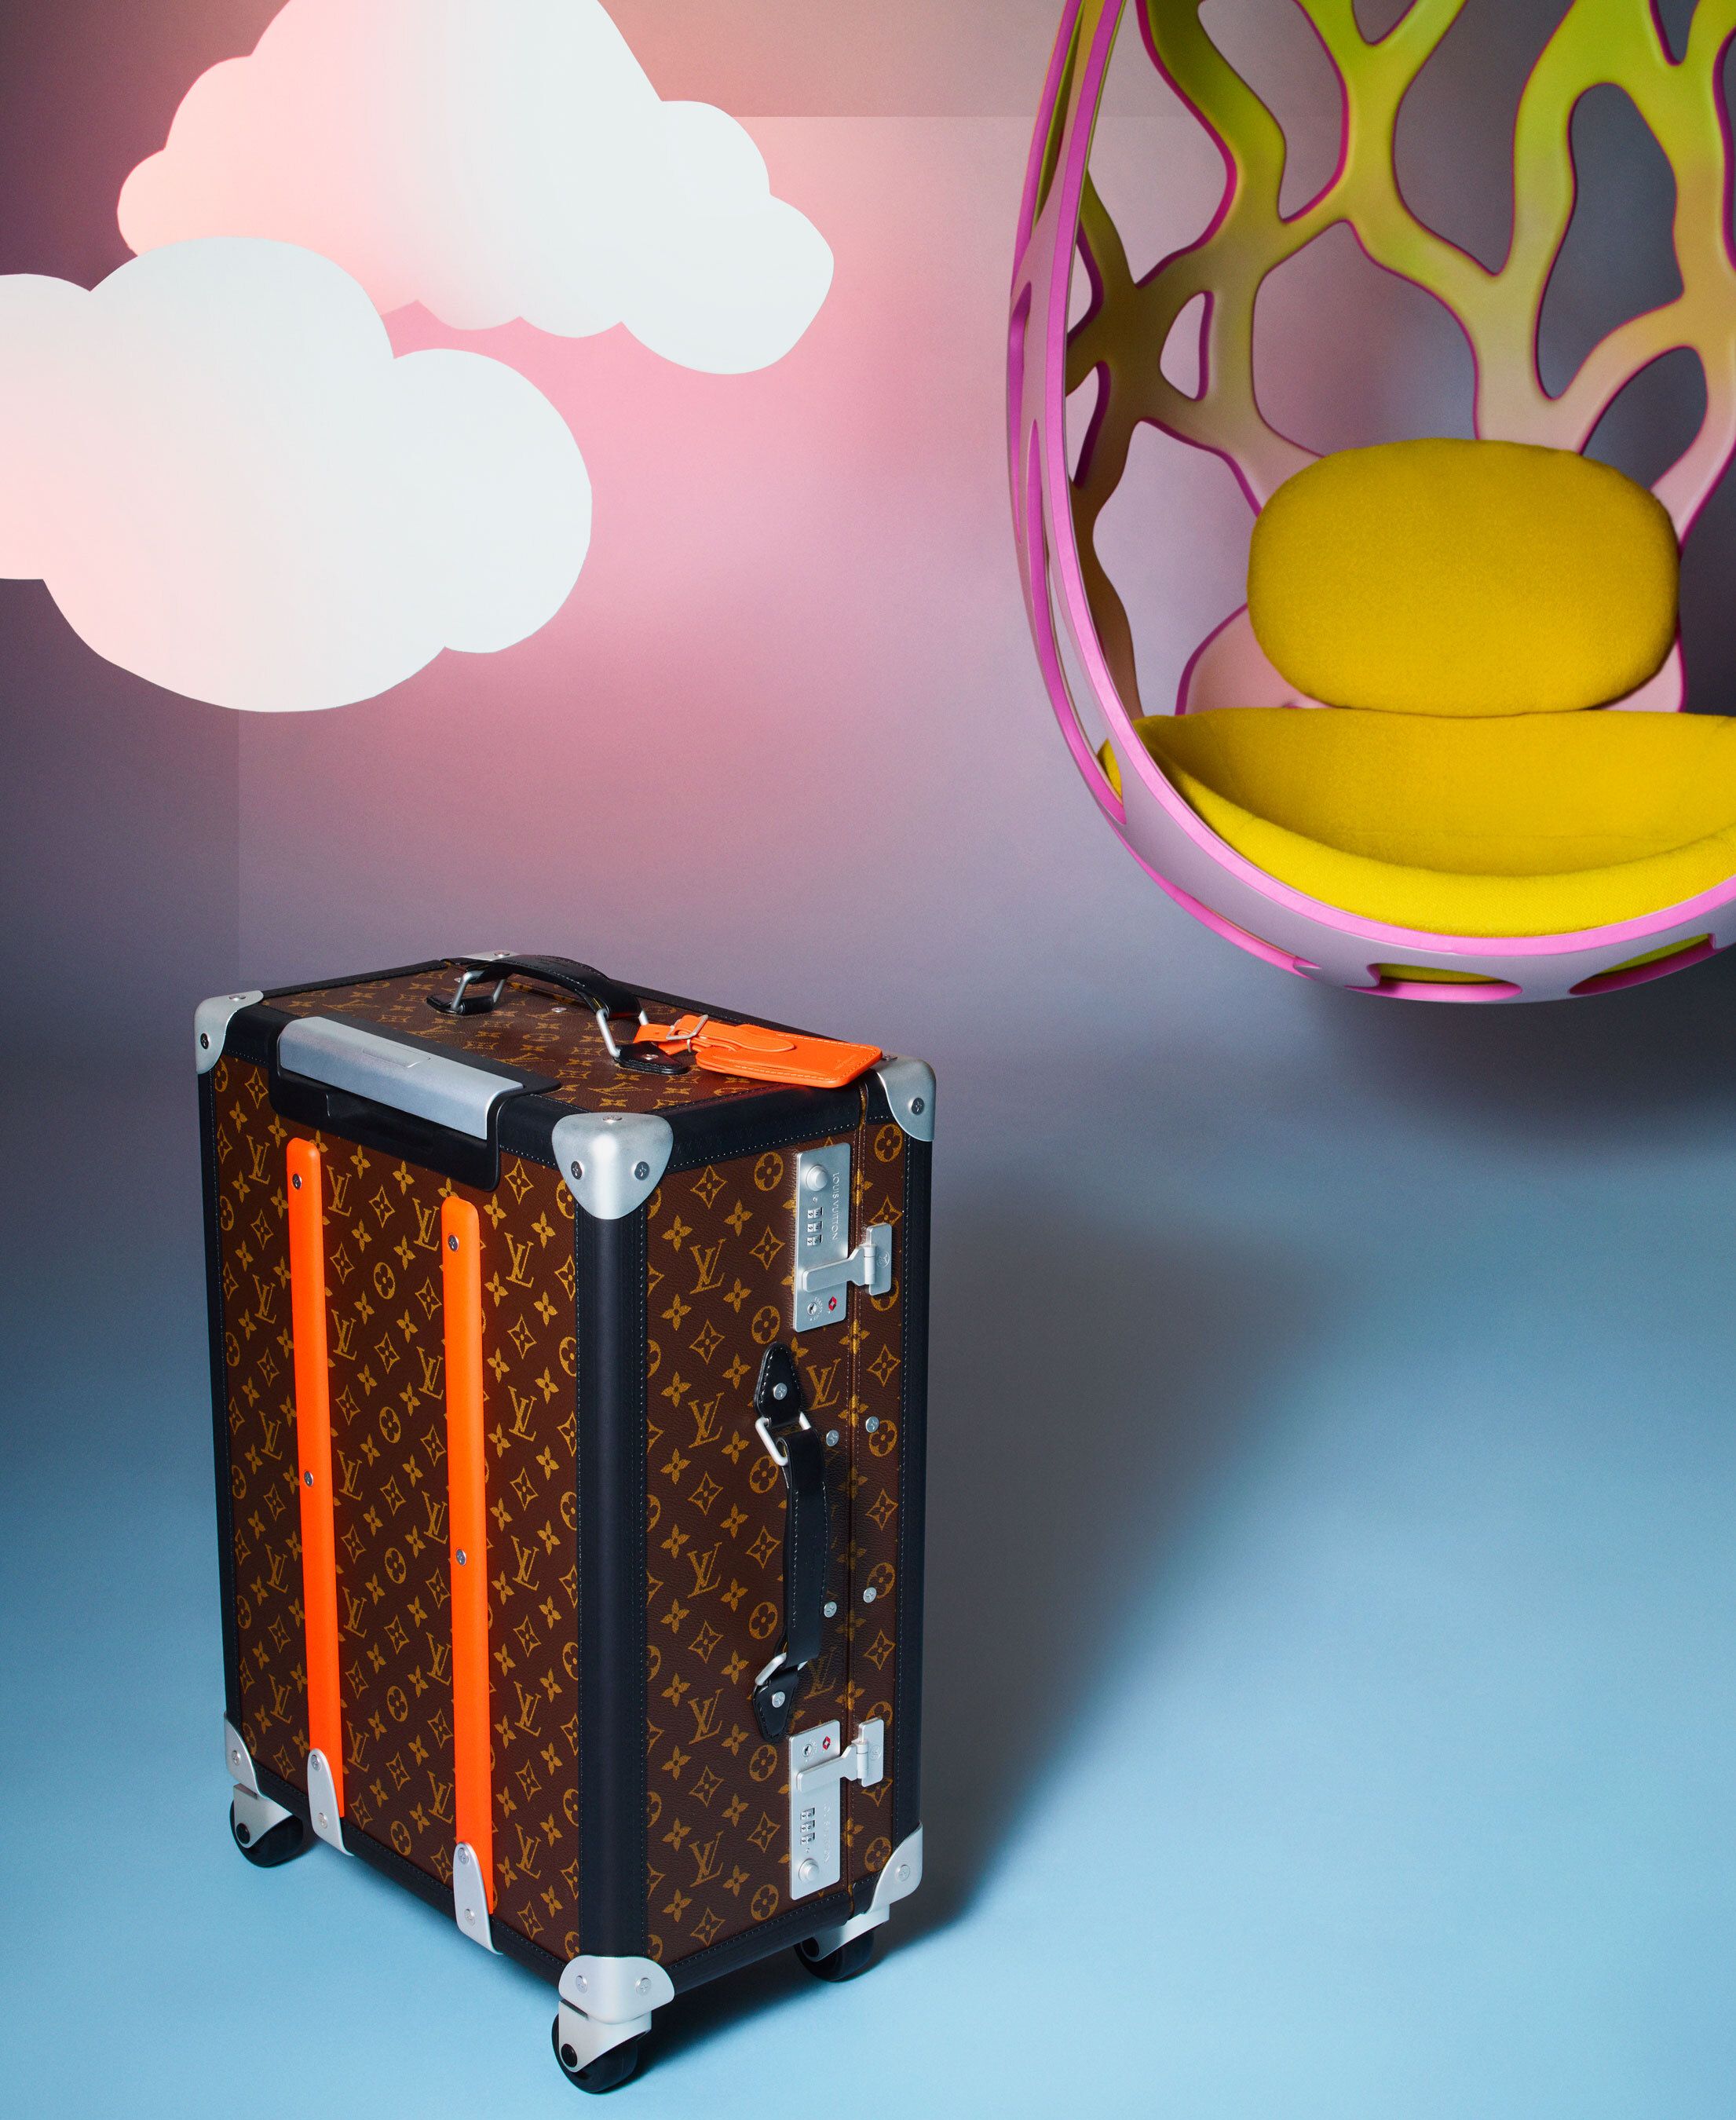 Louis Vuitton's 'Cabinet of Curiosities' trunk for luxury travellers